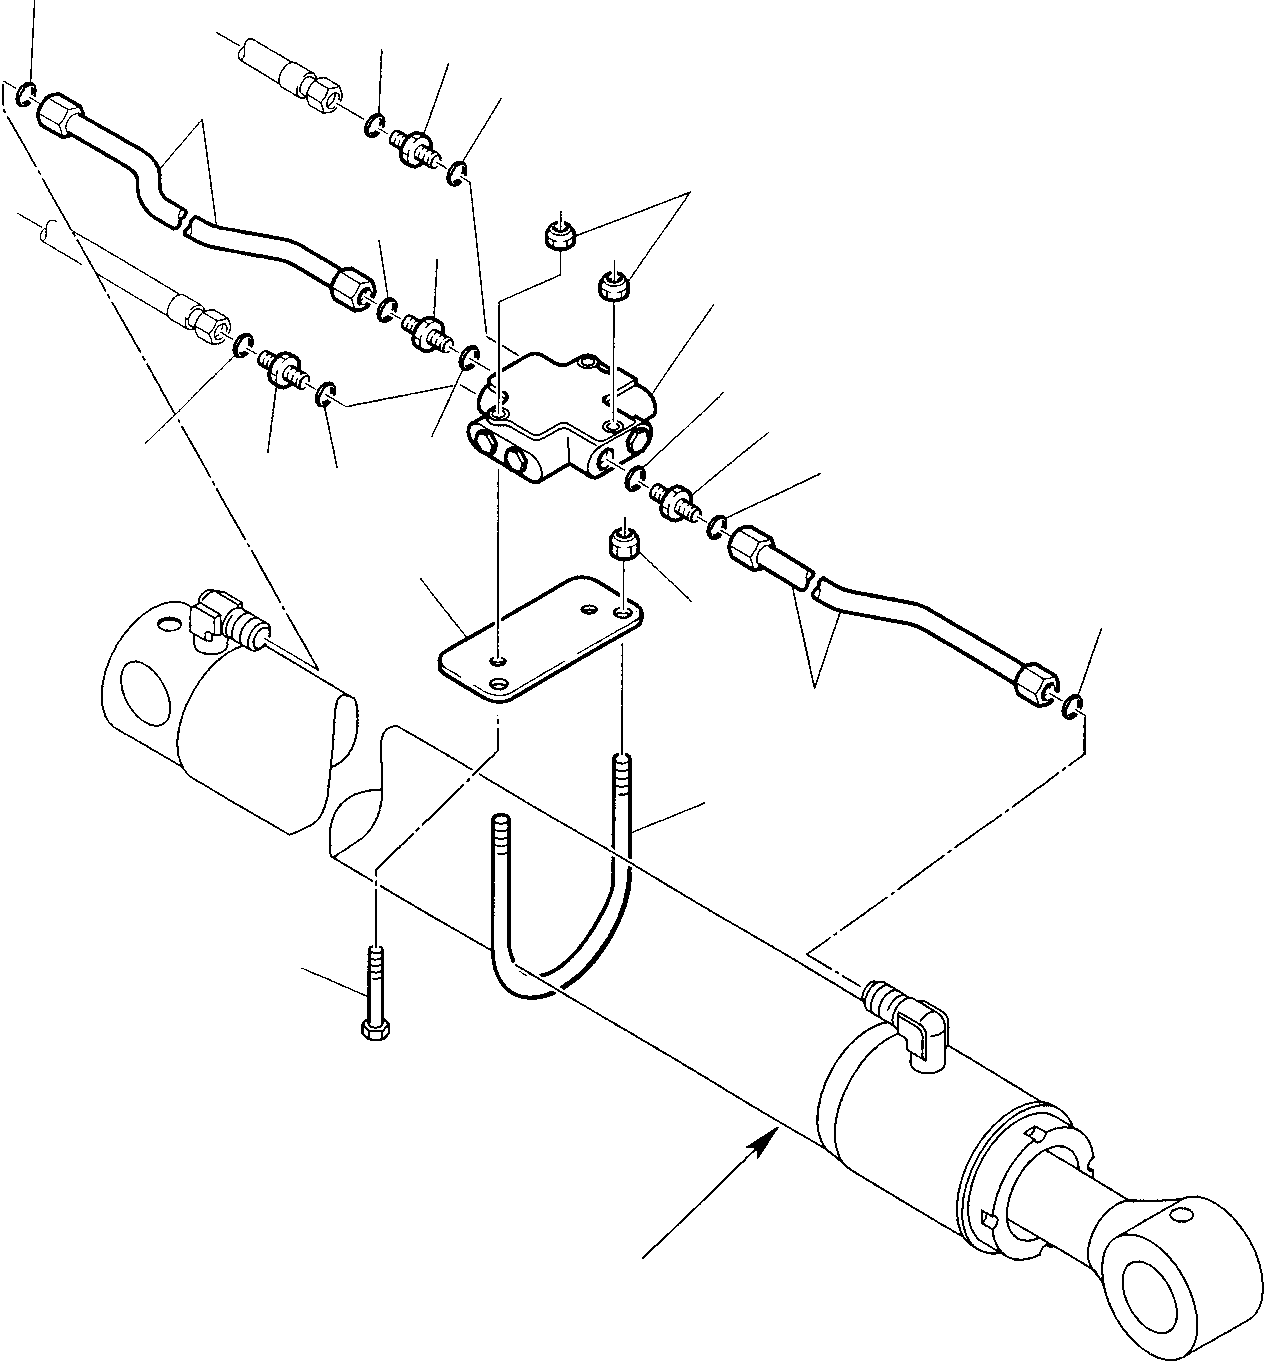 Part 50. HYDRAULIC PIPING (ARM CYLINDER LINE) (SAFETY VALVE) [6735]